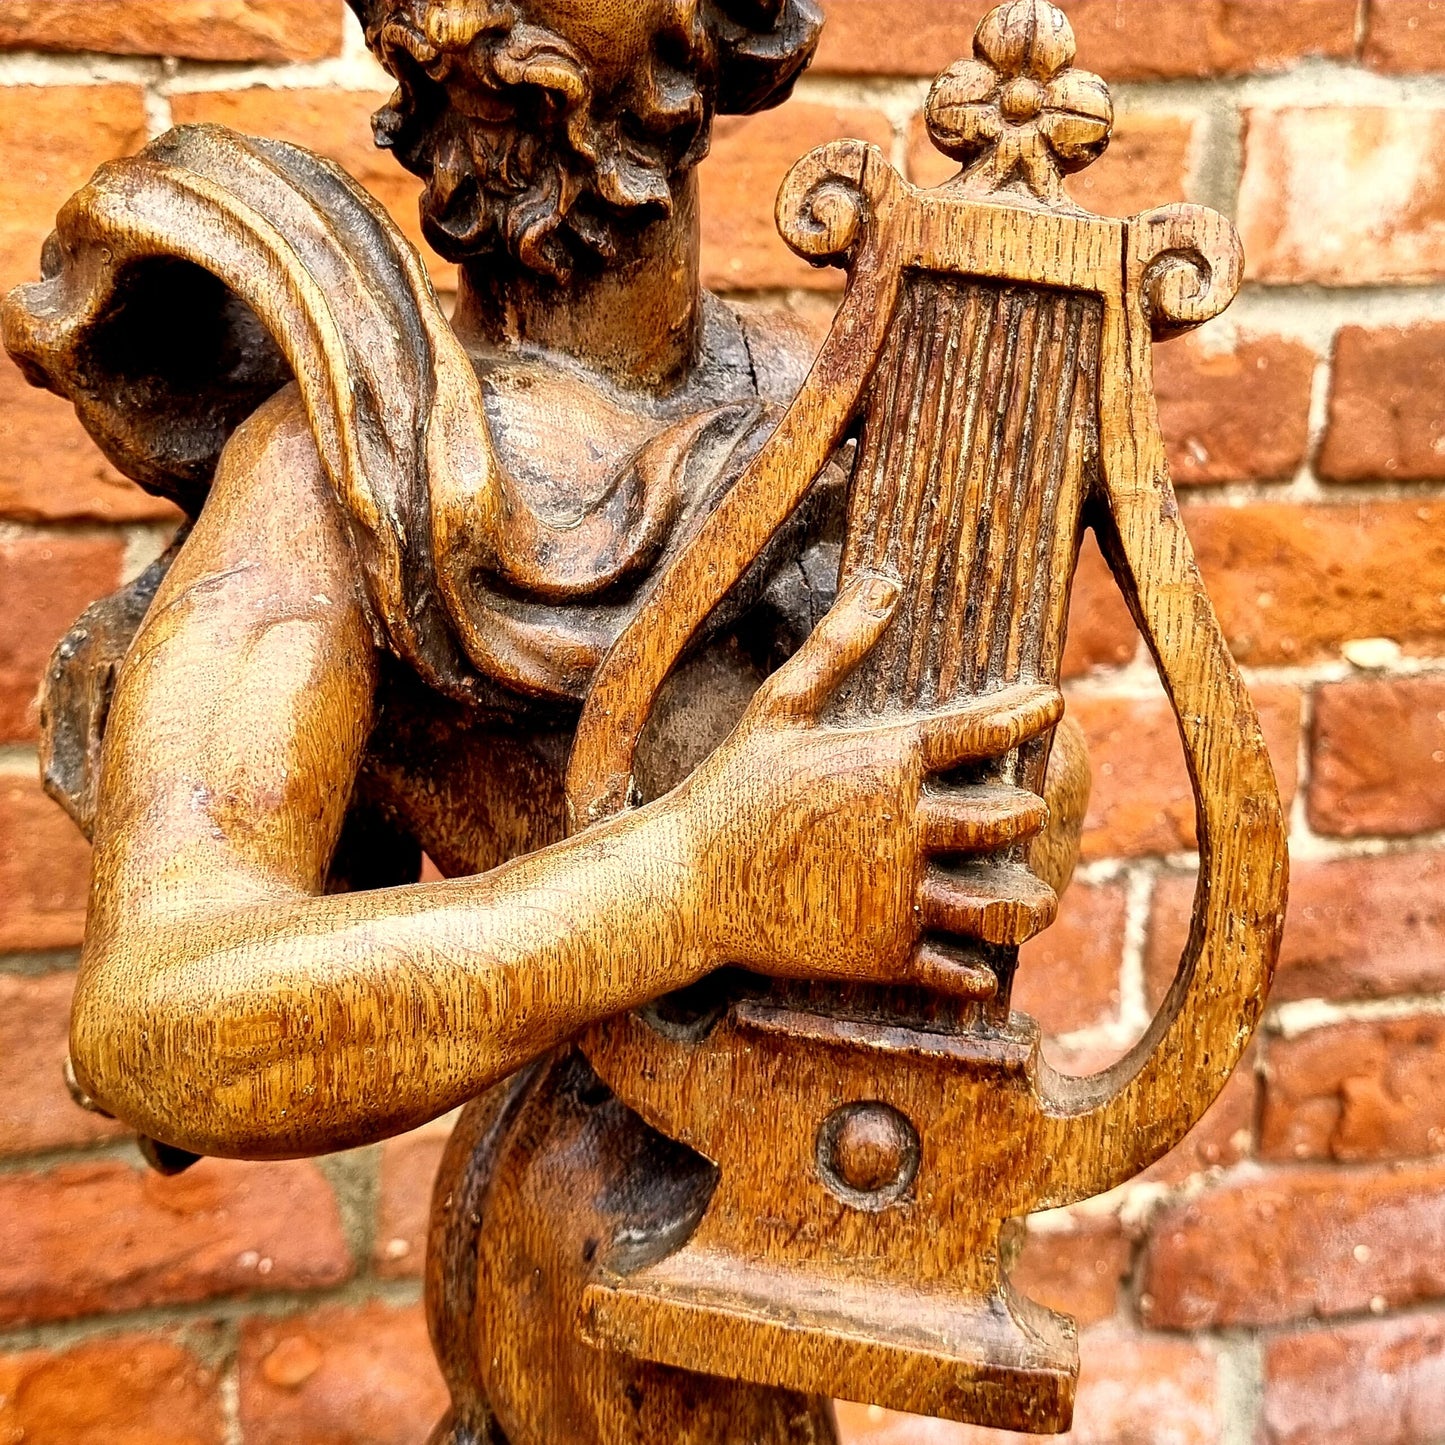 Ex Hurst Collection - Late 17th Century Antique Carved Oak Sculpture of Orpheus With His Lyre